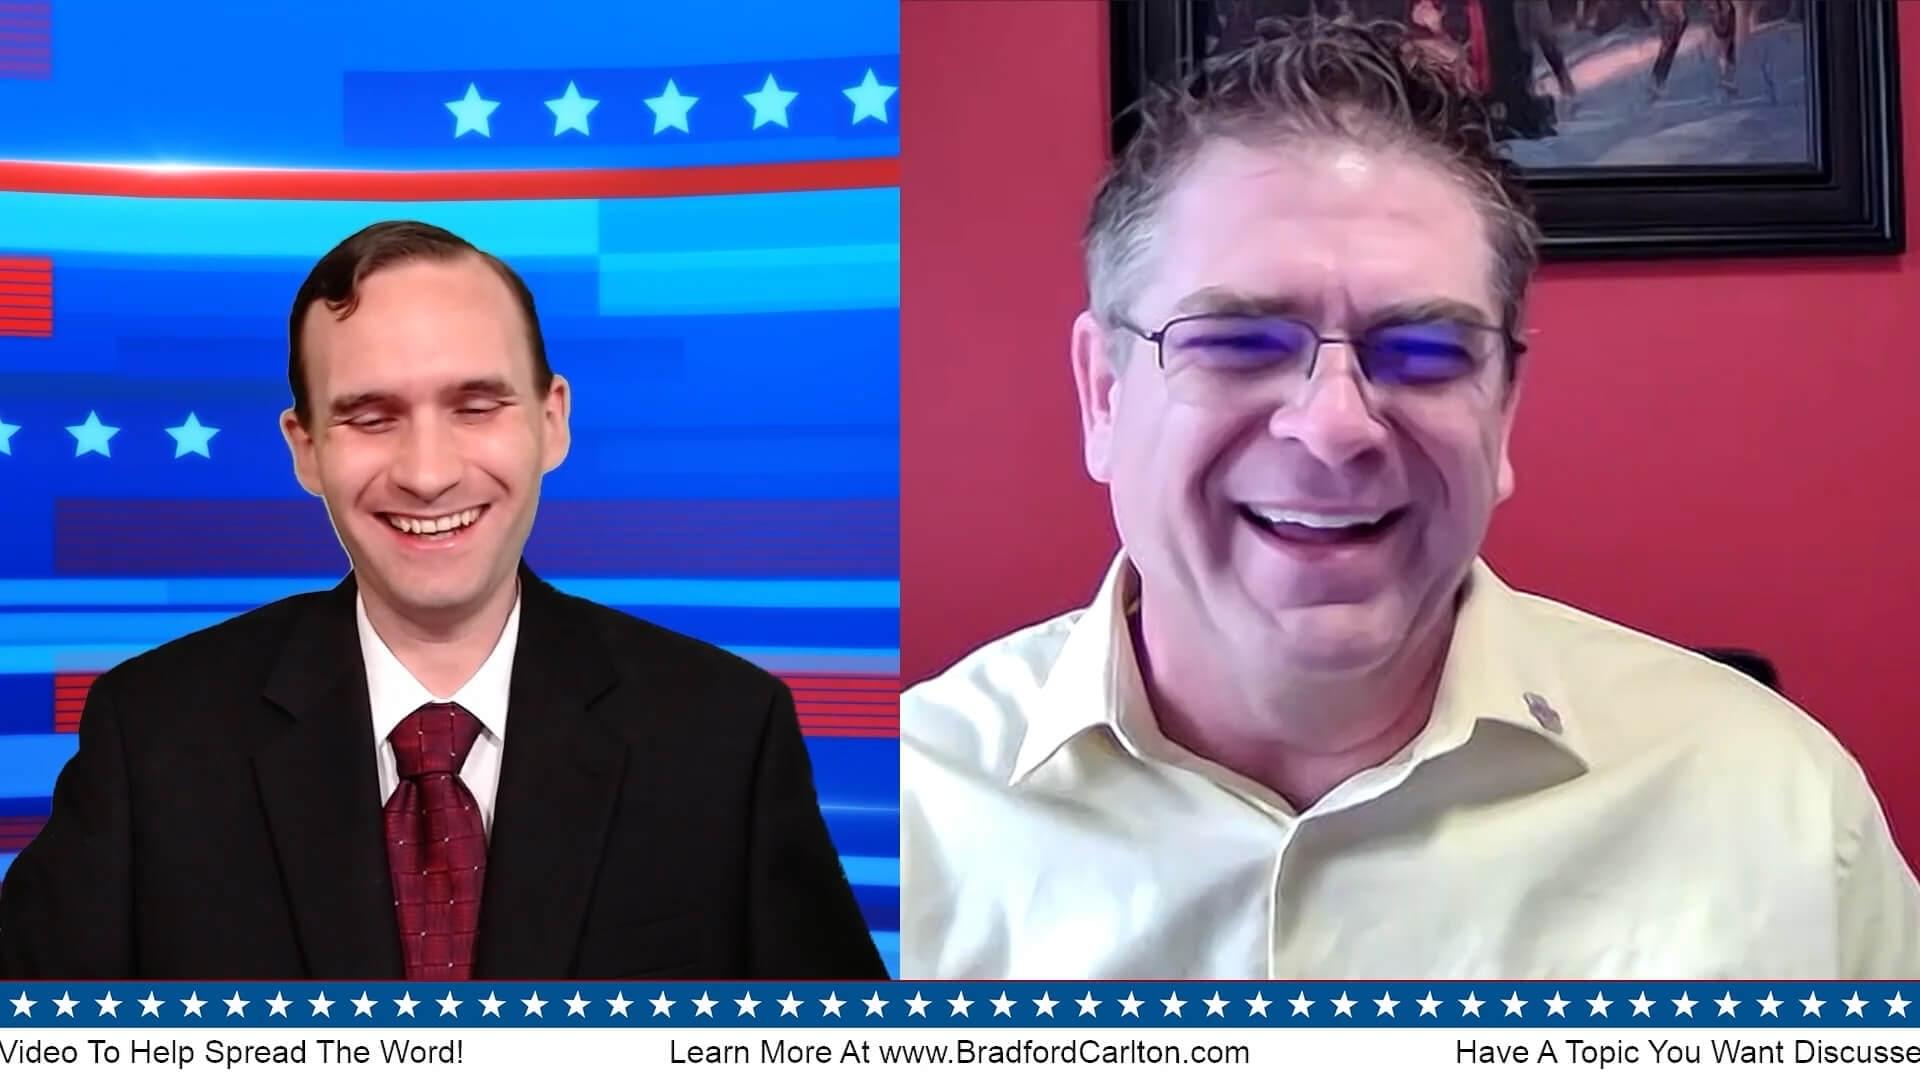 Interview with Chris Null, Chairman of the Salt Lake County Republican Party